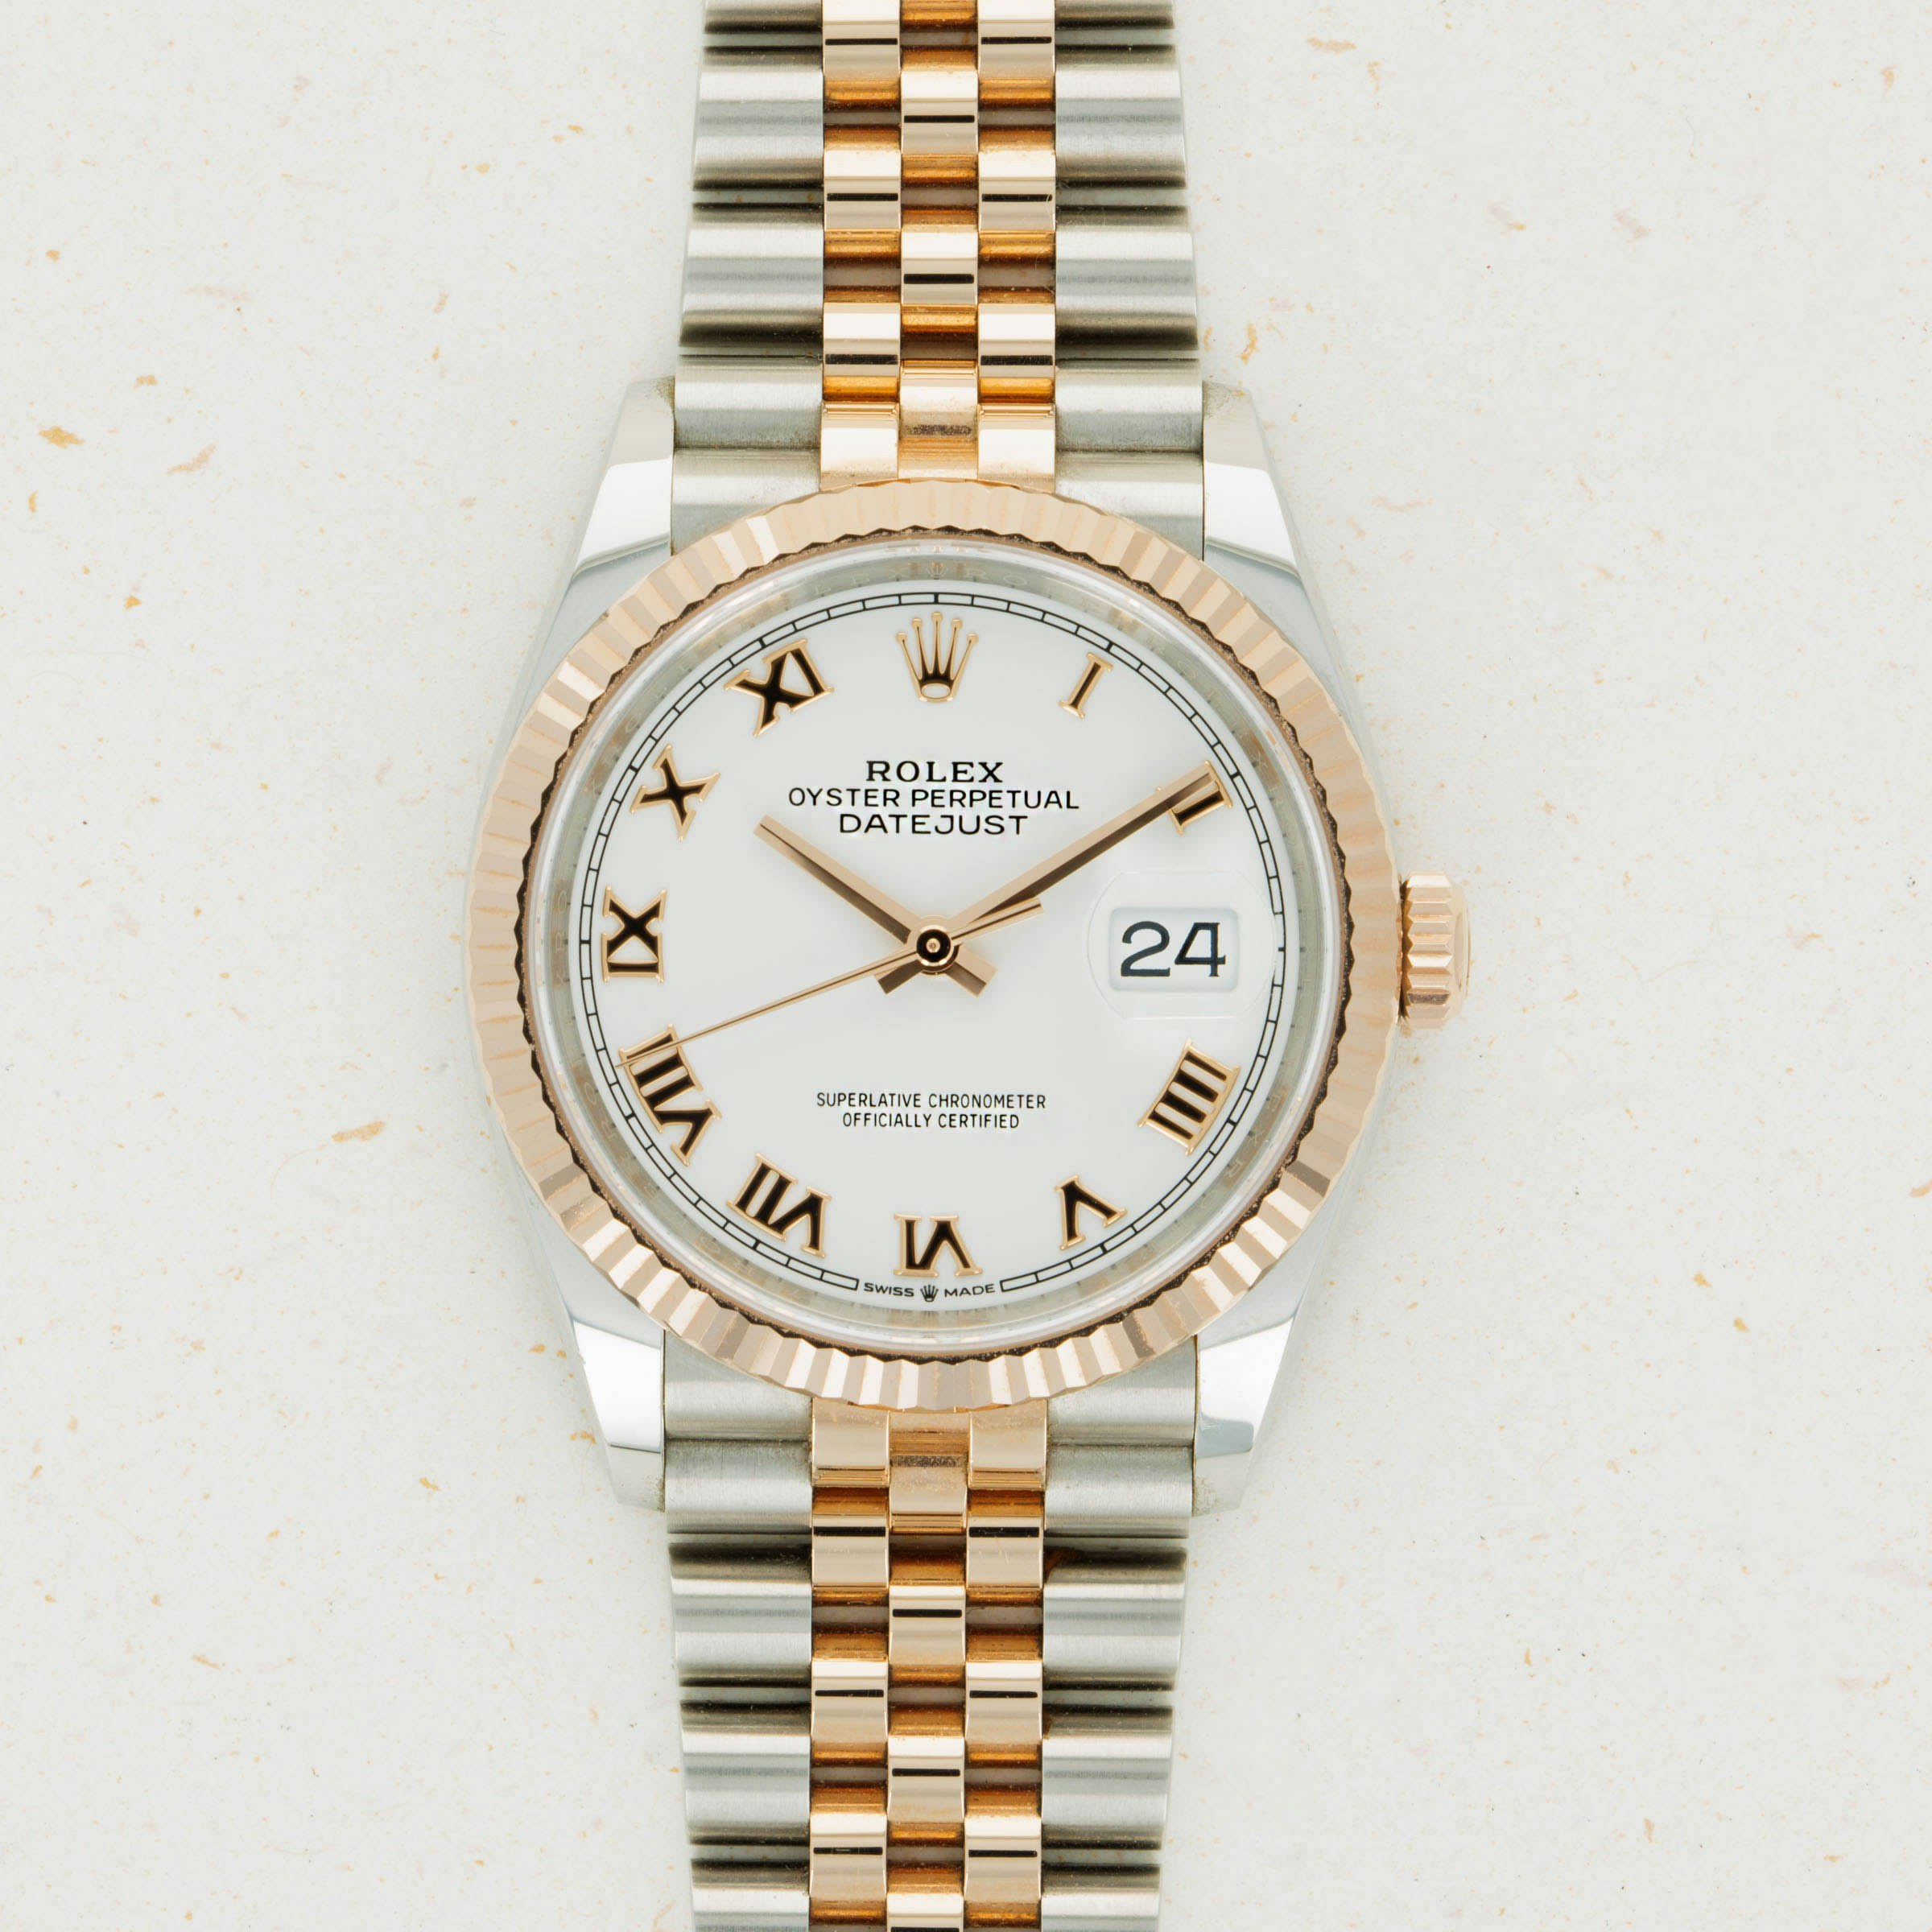 Thumbnail for Rolex Datejust 126231 Two Tone Steel and Rose Gold